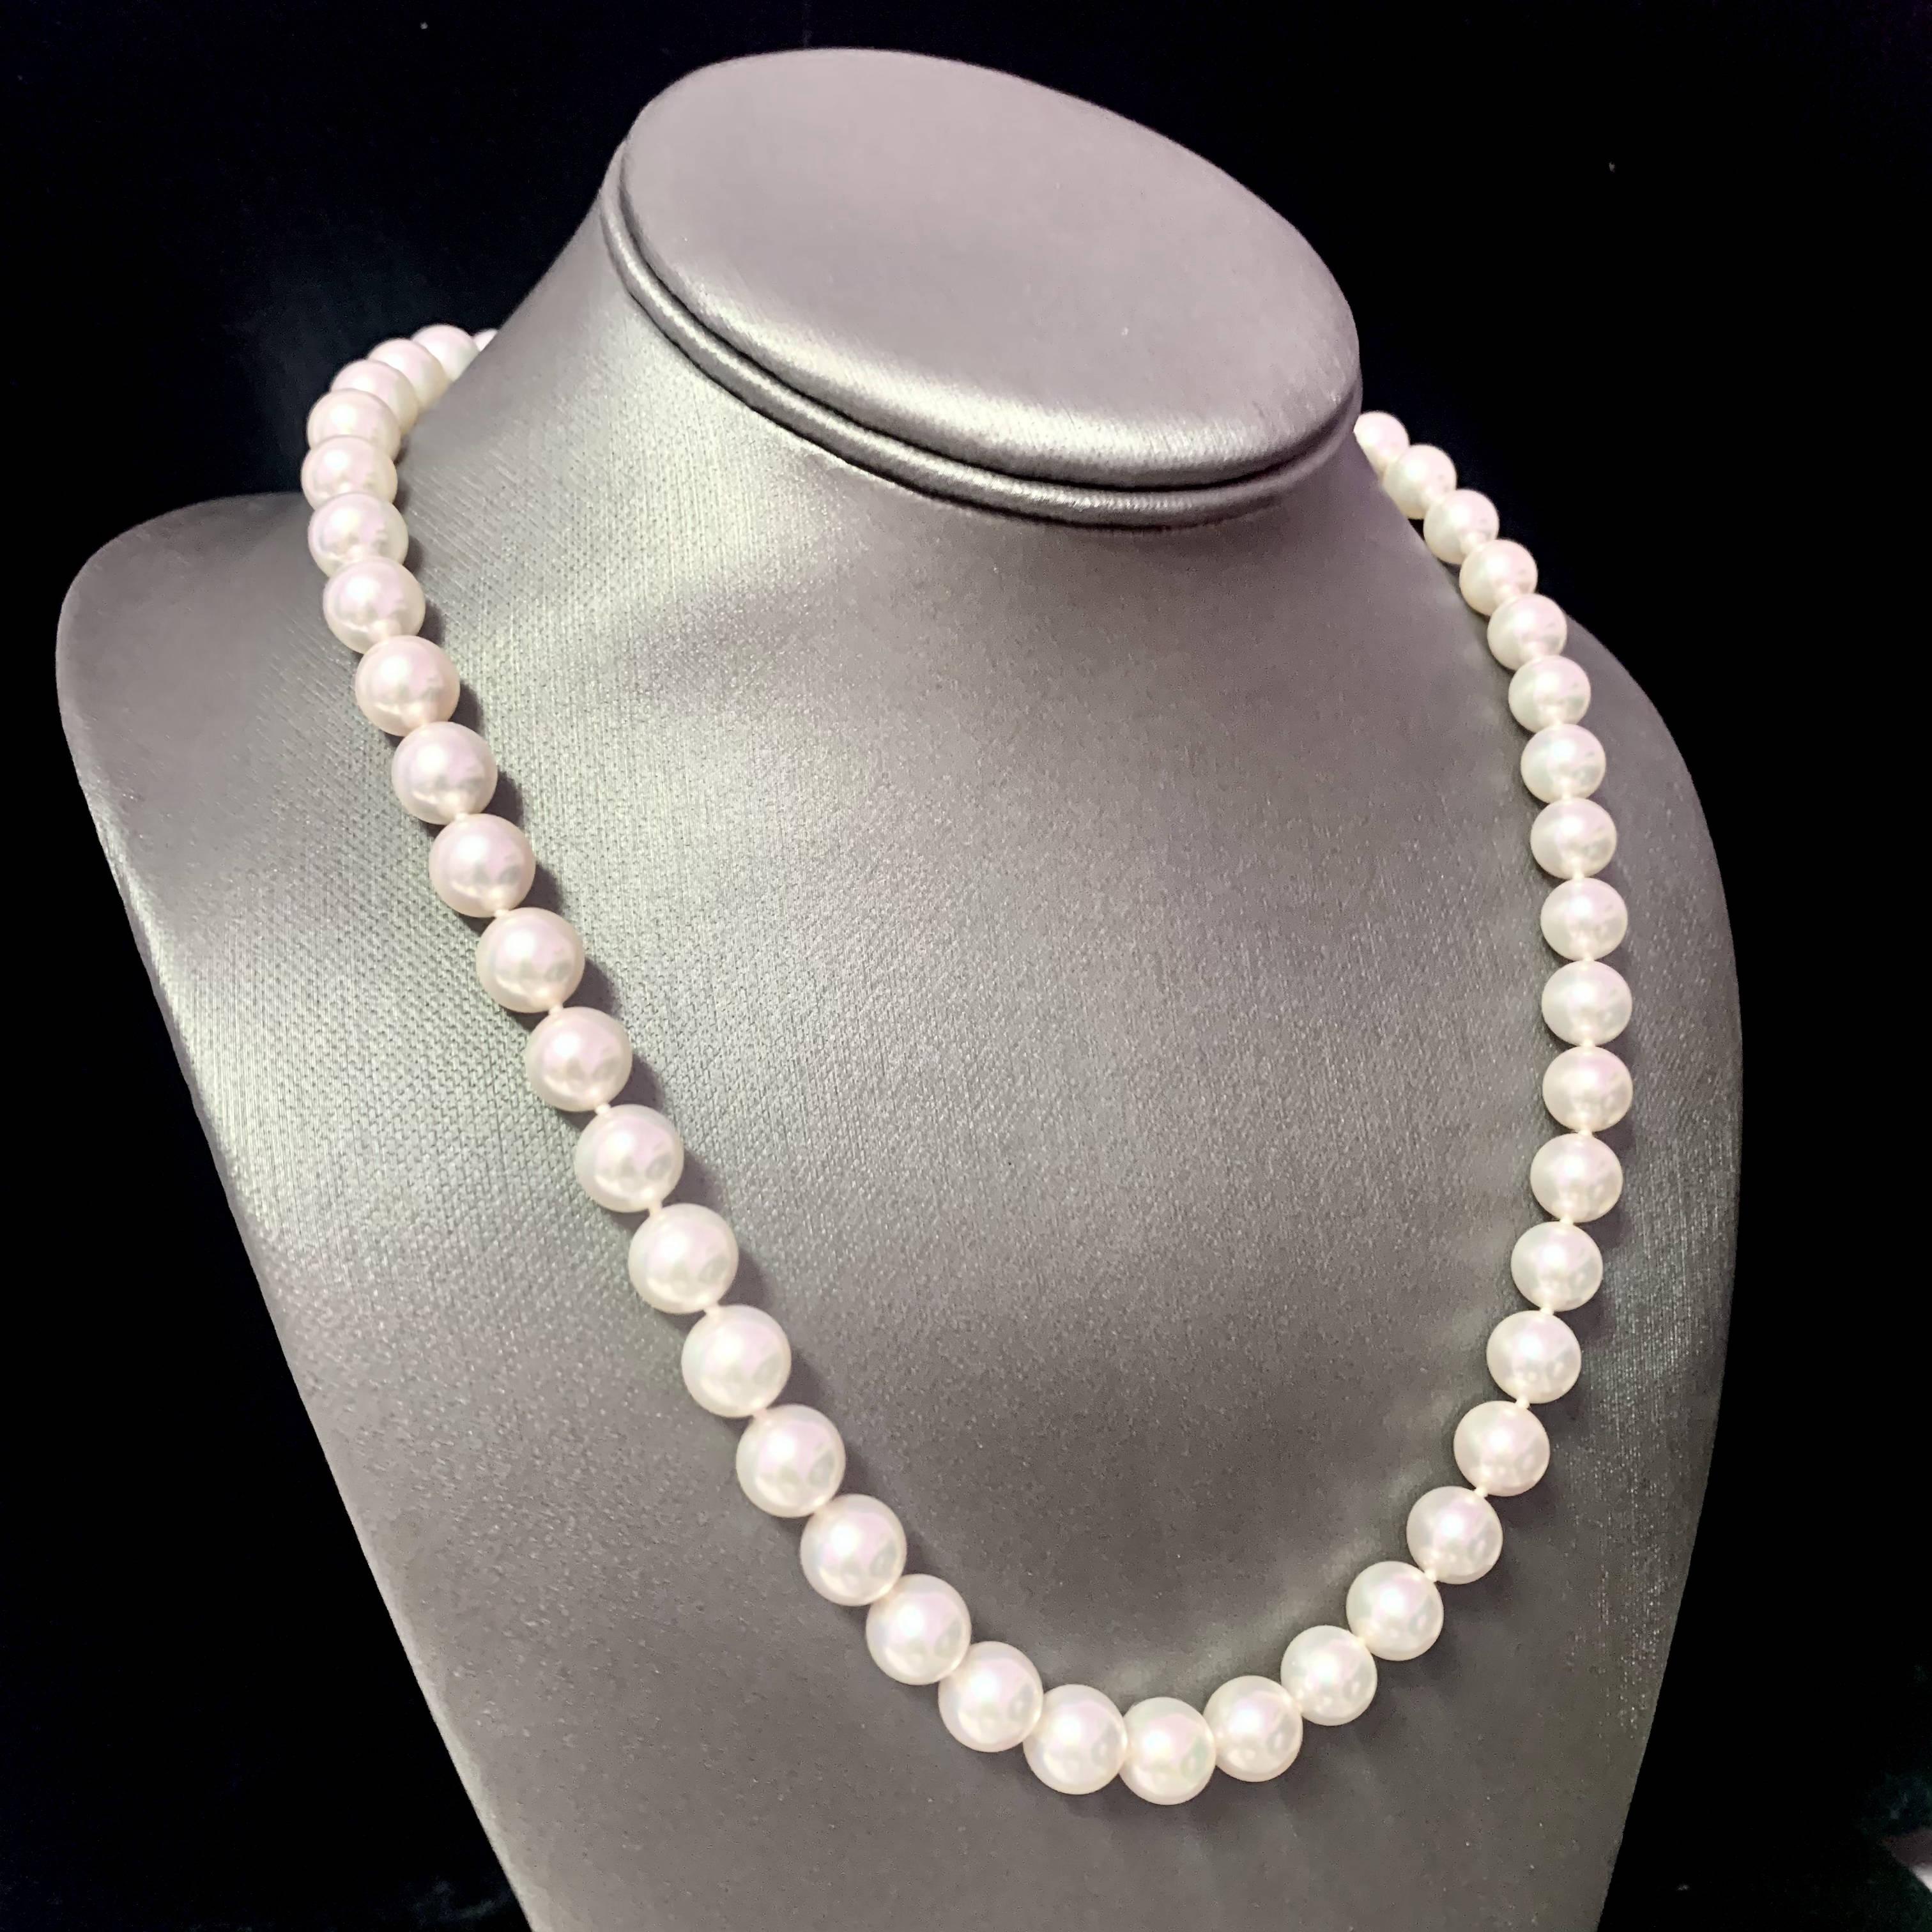 Certified and Appraised by Mikimoto in New York for the amount of $37,840

Estate Mikimoto 51 Pearls LARGE 9.5-9 mm 20 Inches 18 KT Yellow Gold Clasp

TRUSTED SELLER SINCE 2002

PLEASE REVIEW OUR 100% POSITIVE FEEDBACKS FROM OUR HAPPY